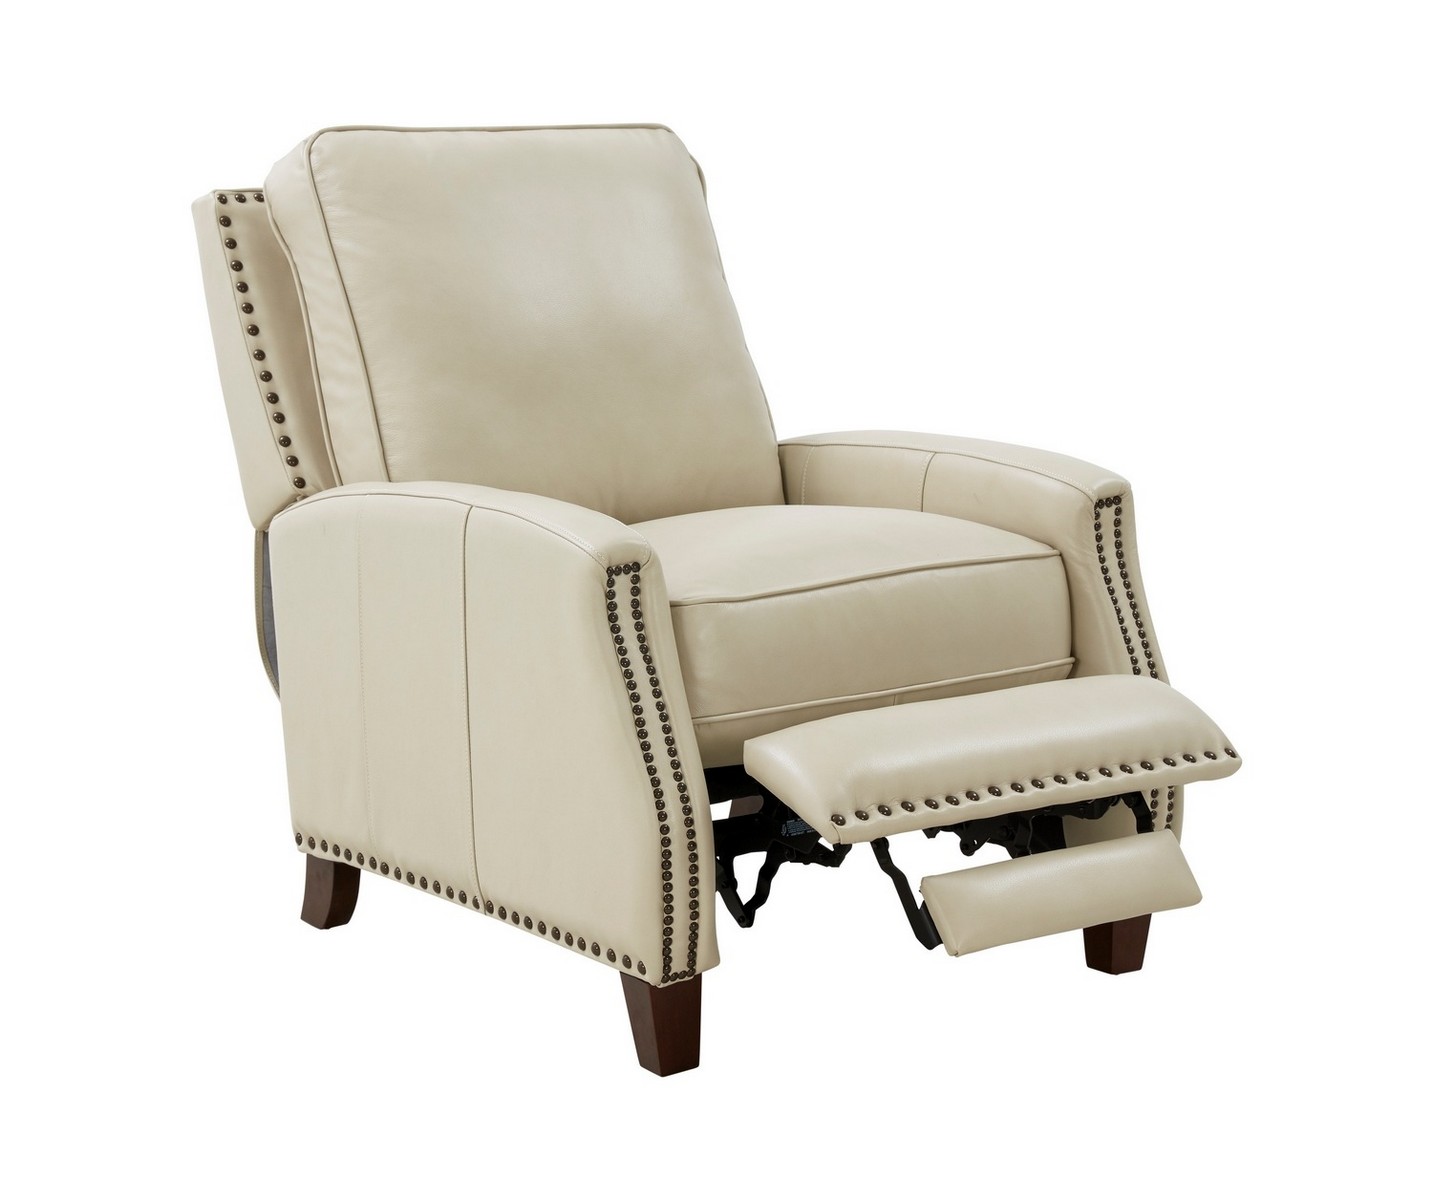 Barcalounger Melrose Recliner Chair - Barone Parchment/All Leather